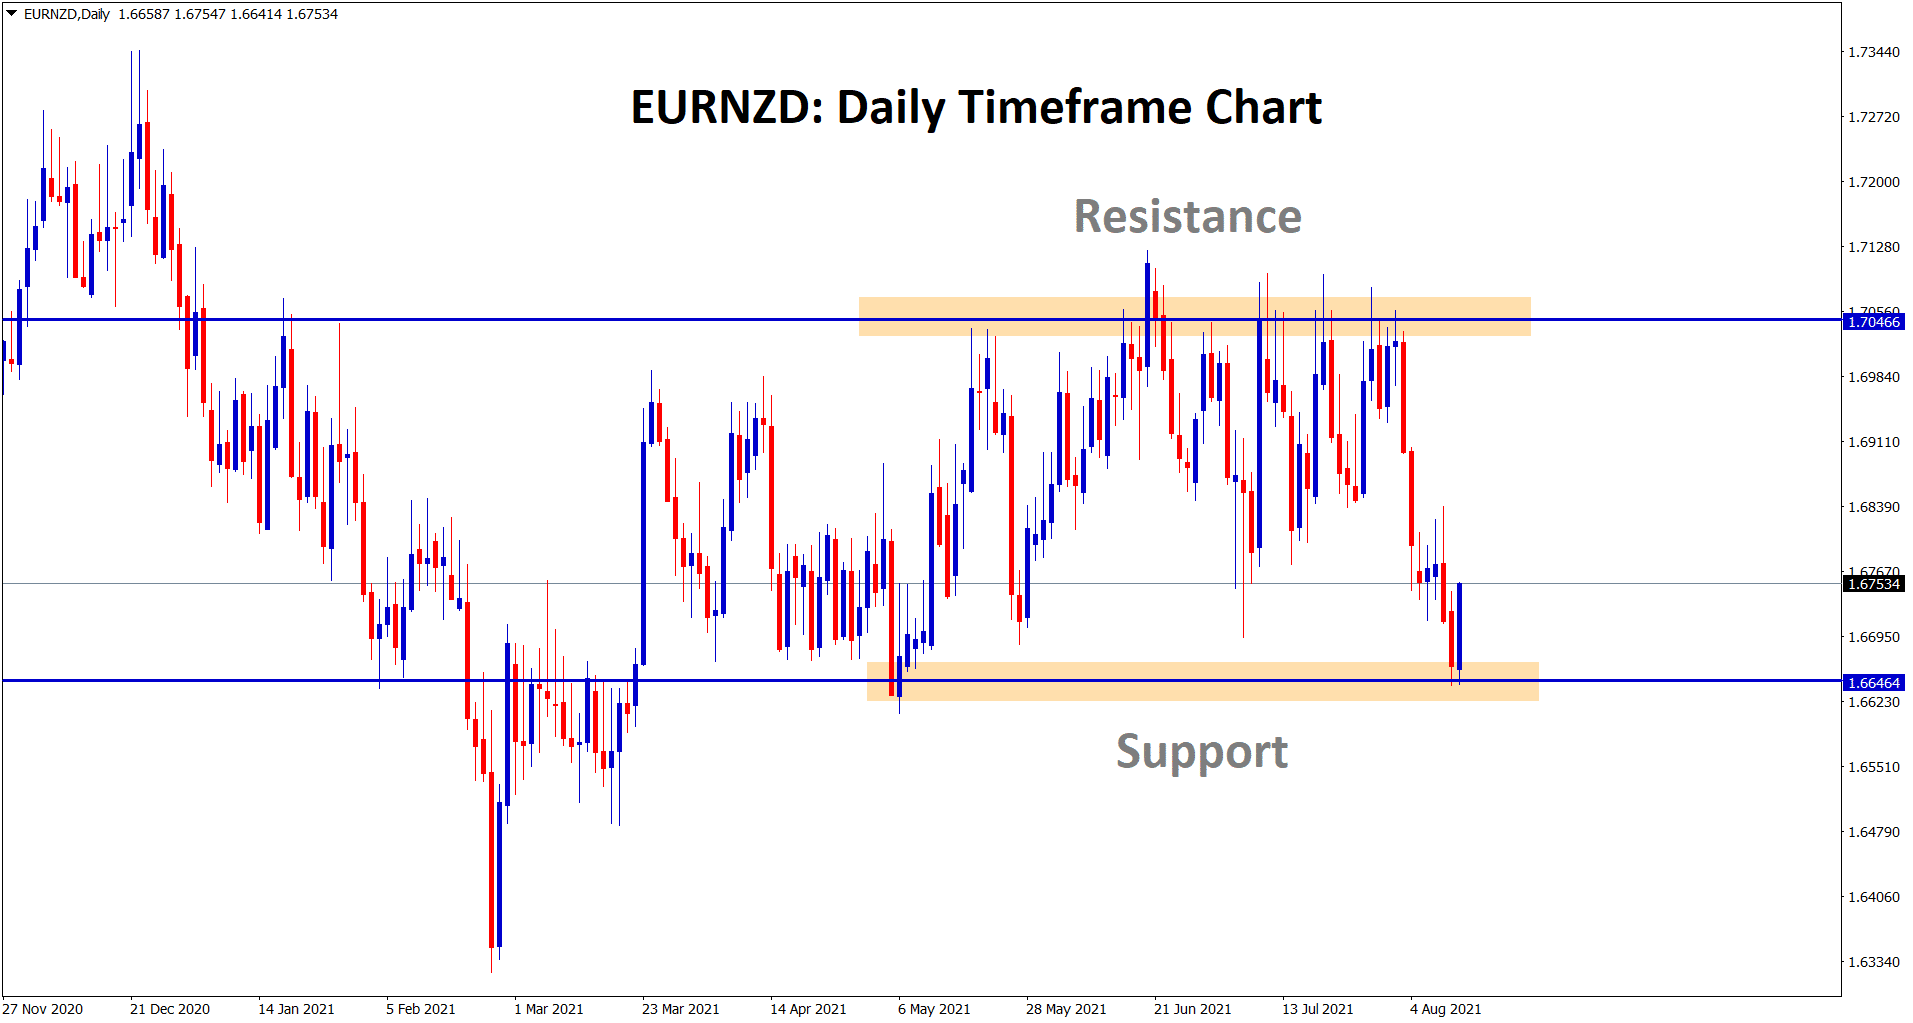 EURNZD bounces back harder from the support area today.